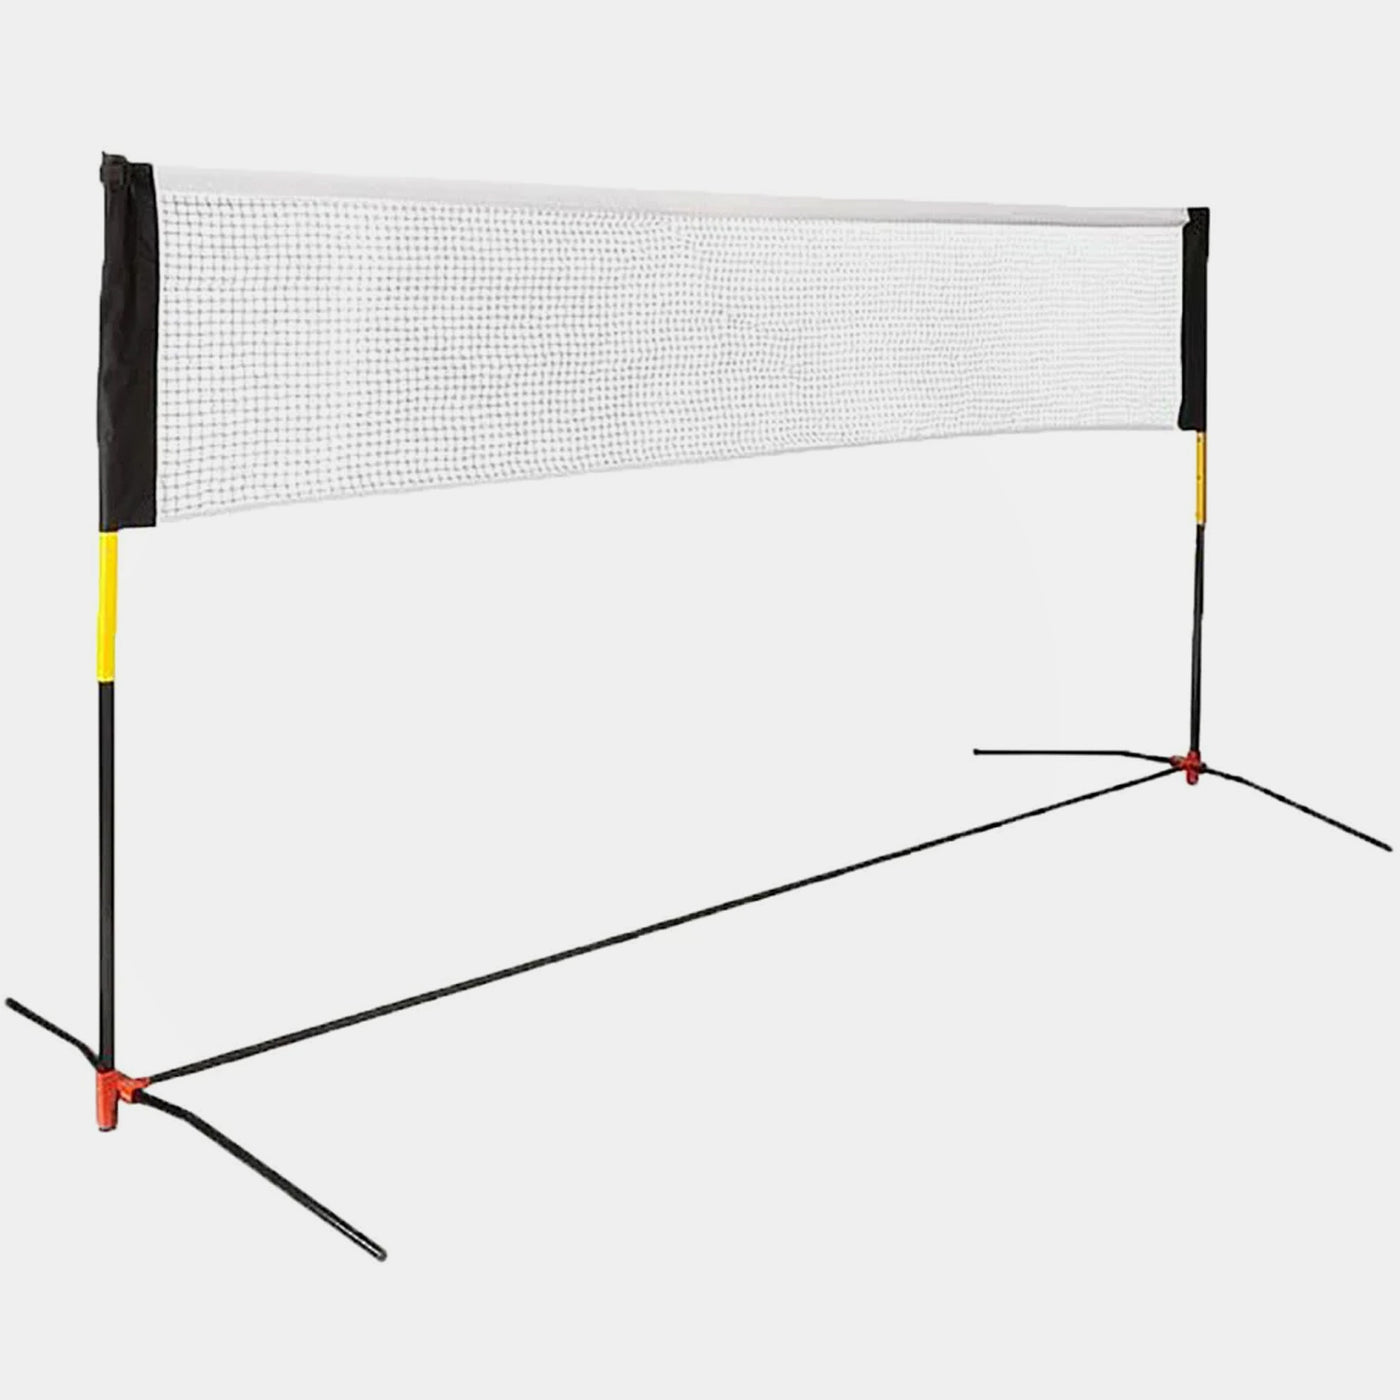 Badminton Net Jazee | White (Net Component Only)